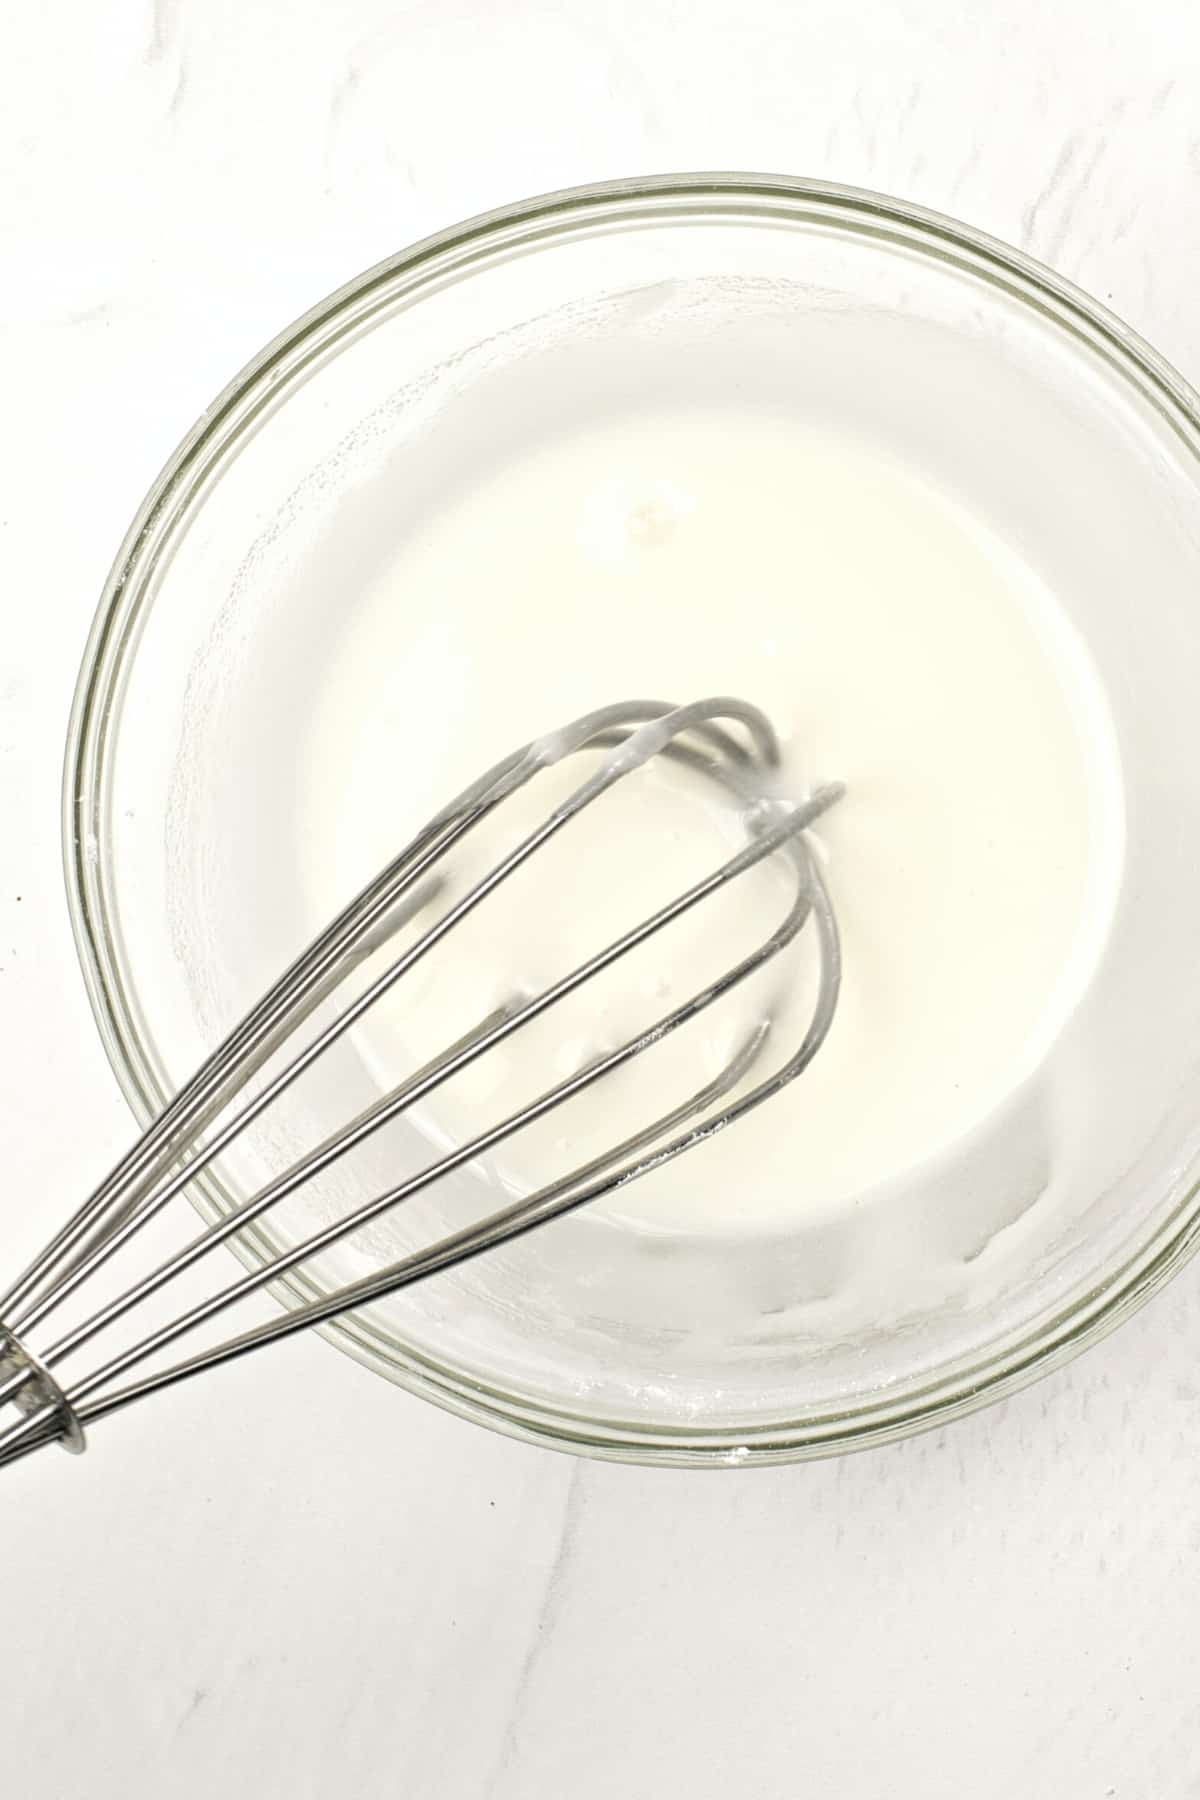 Whisking icing in glass bowl.